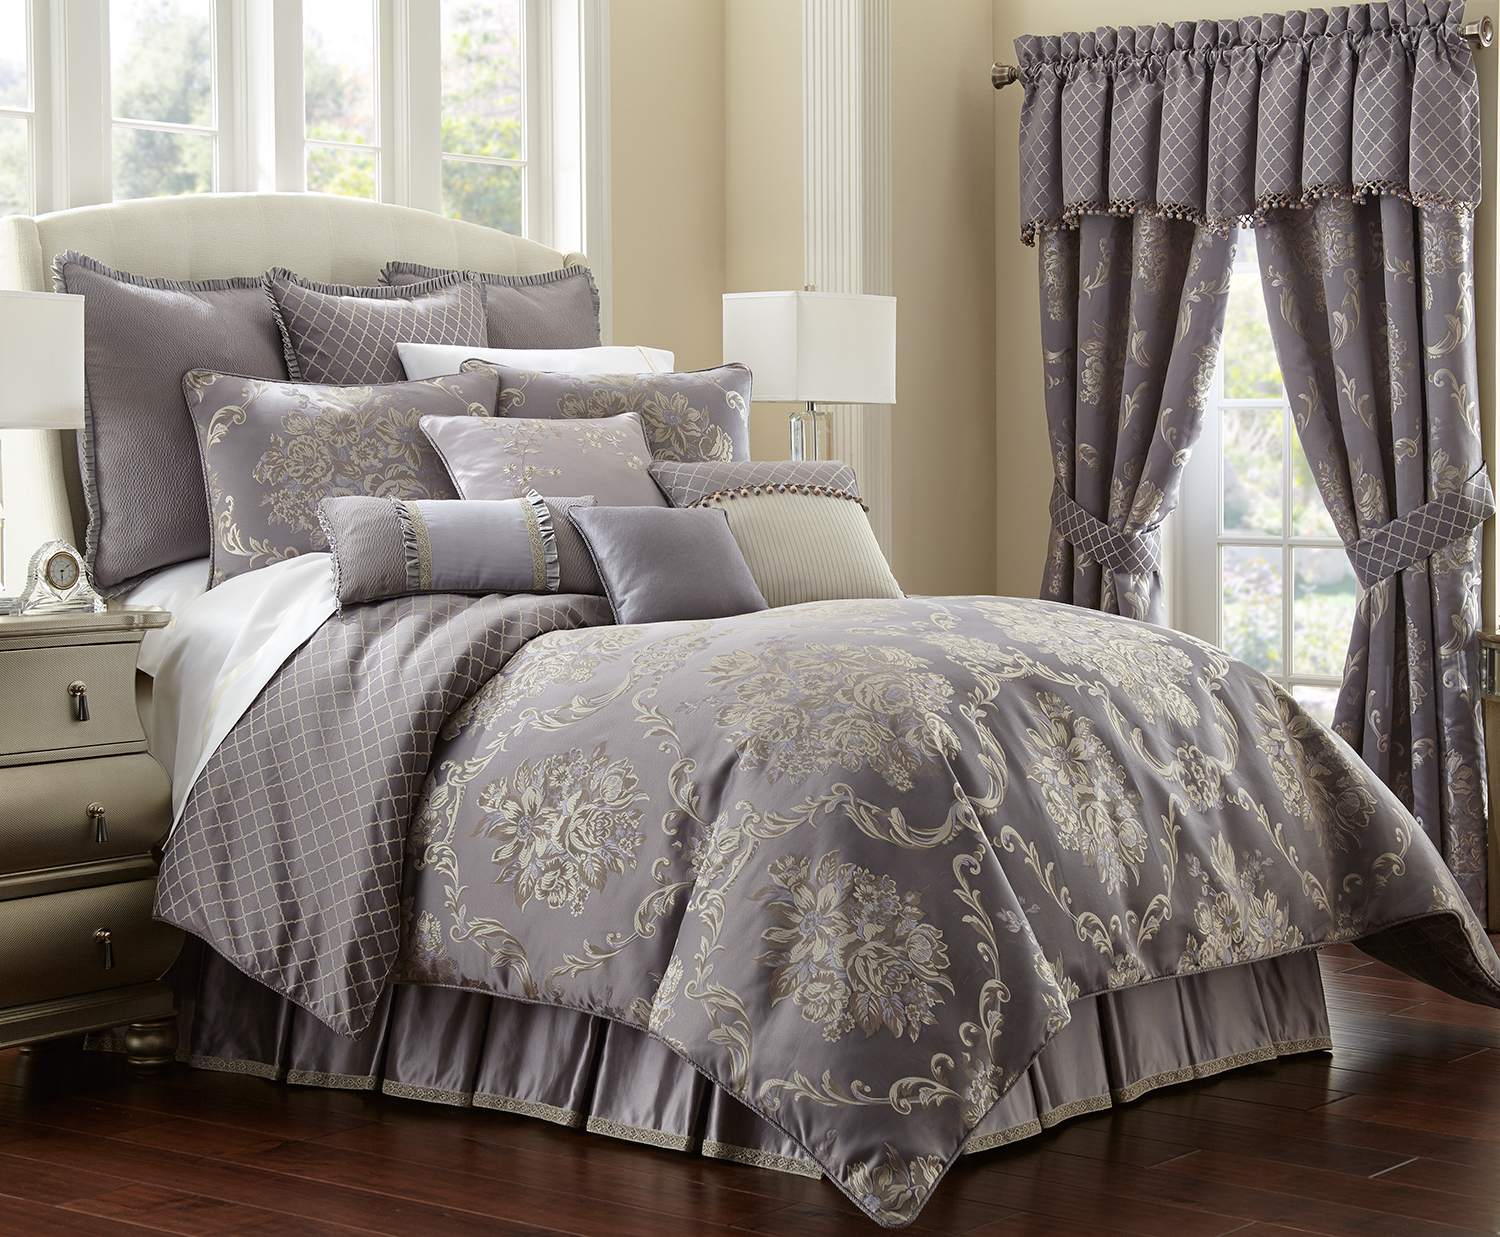 Manor House by Waterford Luxury Bedding  